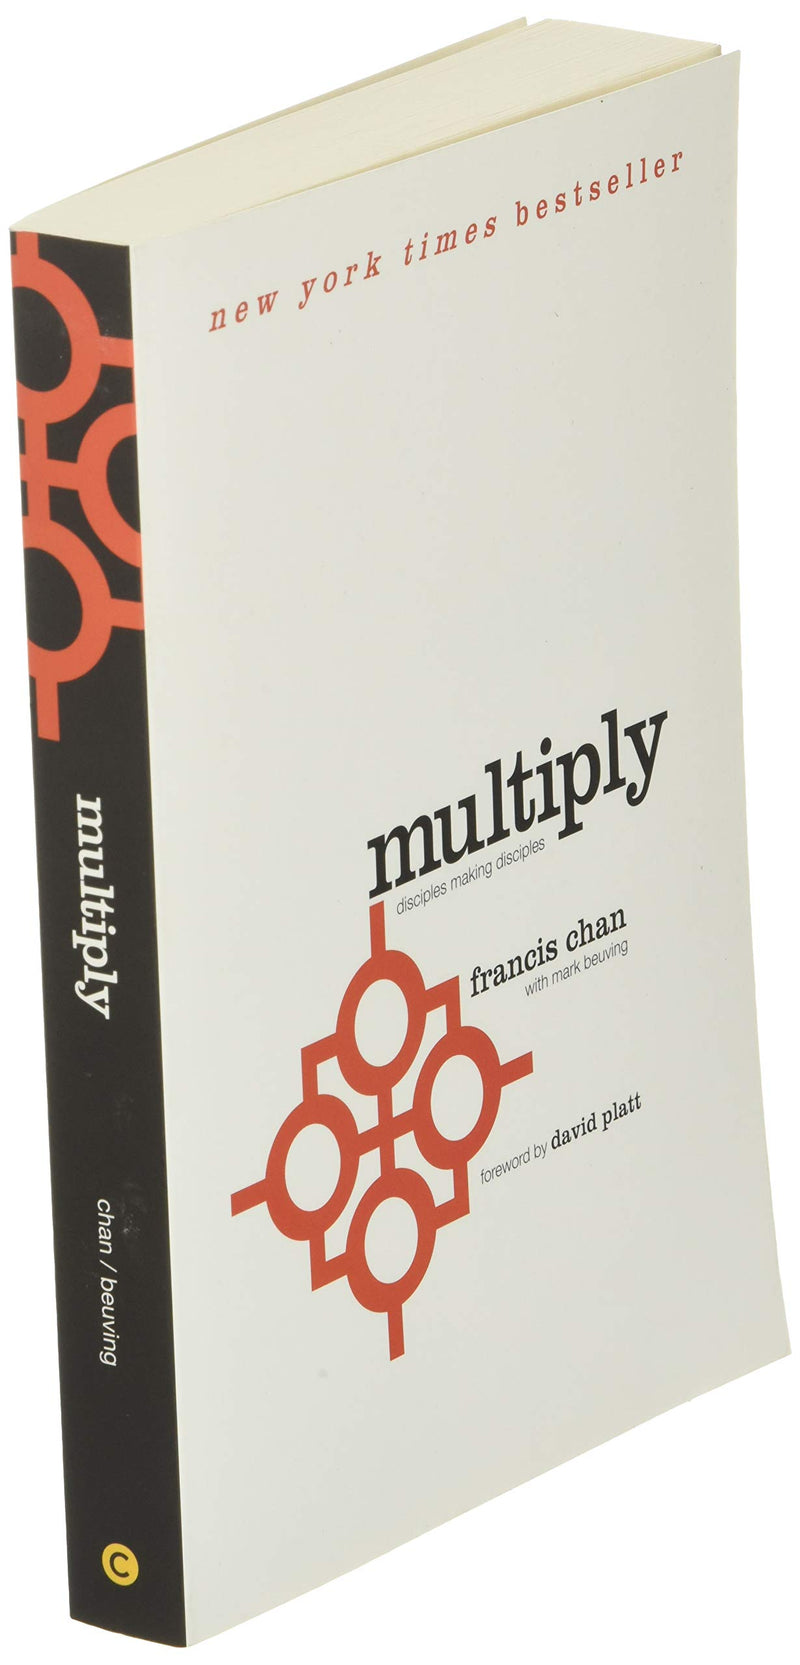 Multiply: Disciples Making Disciples - Re-vived